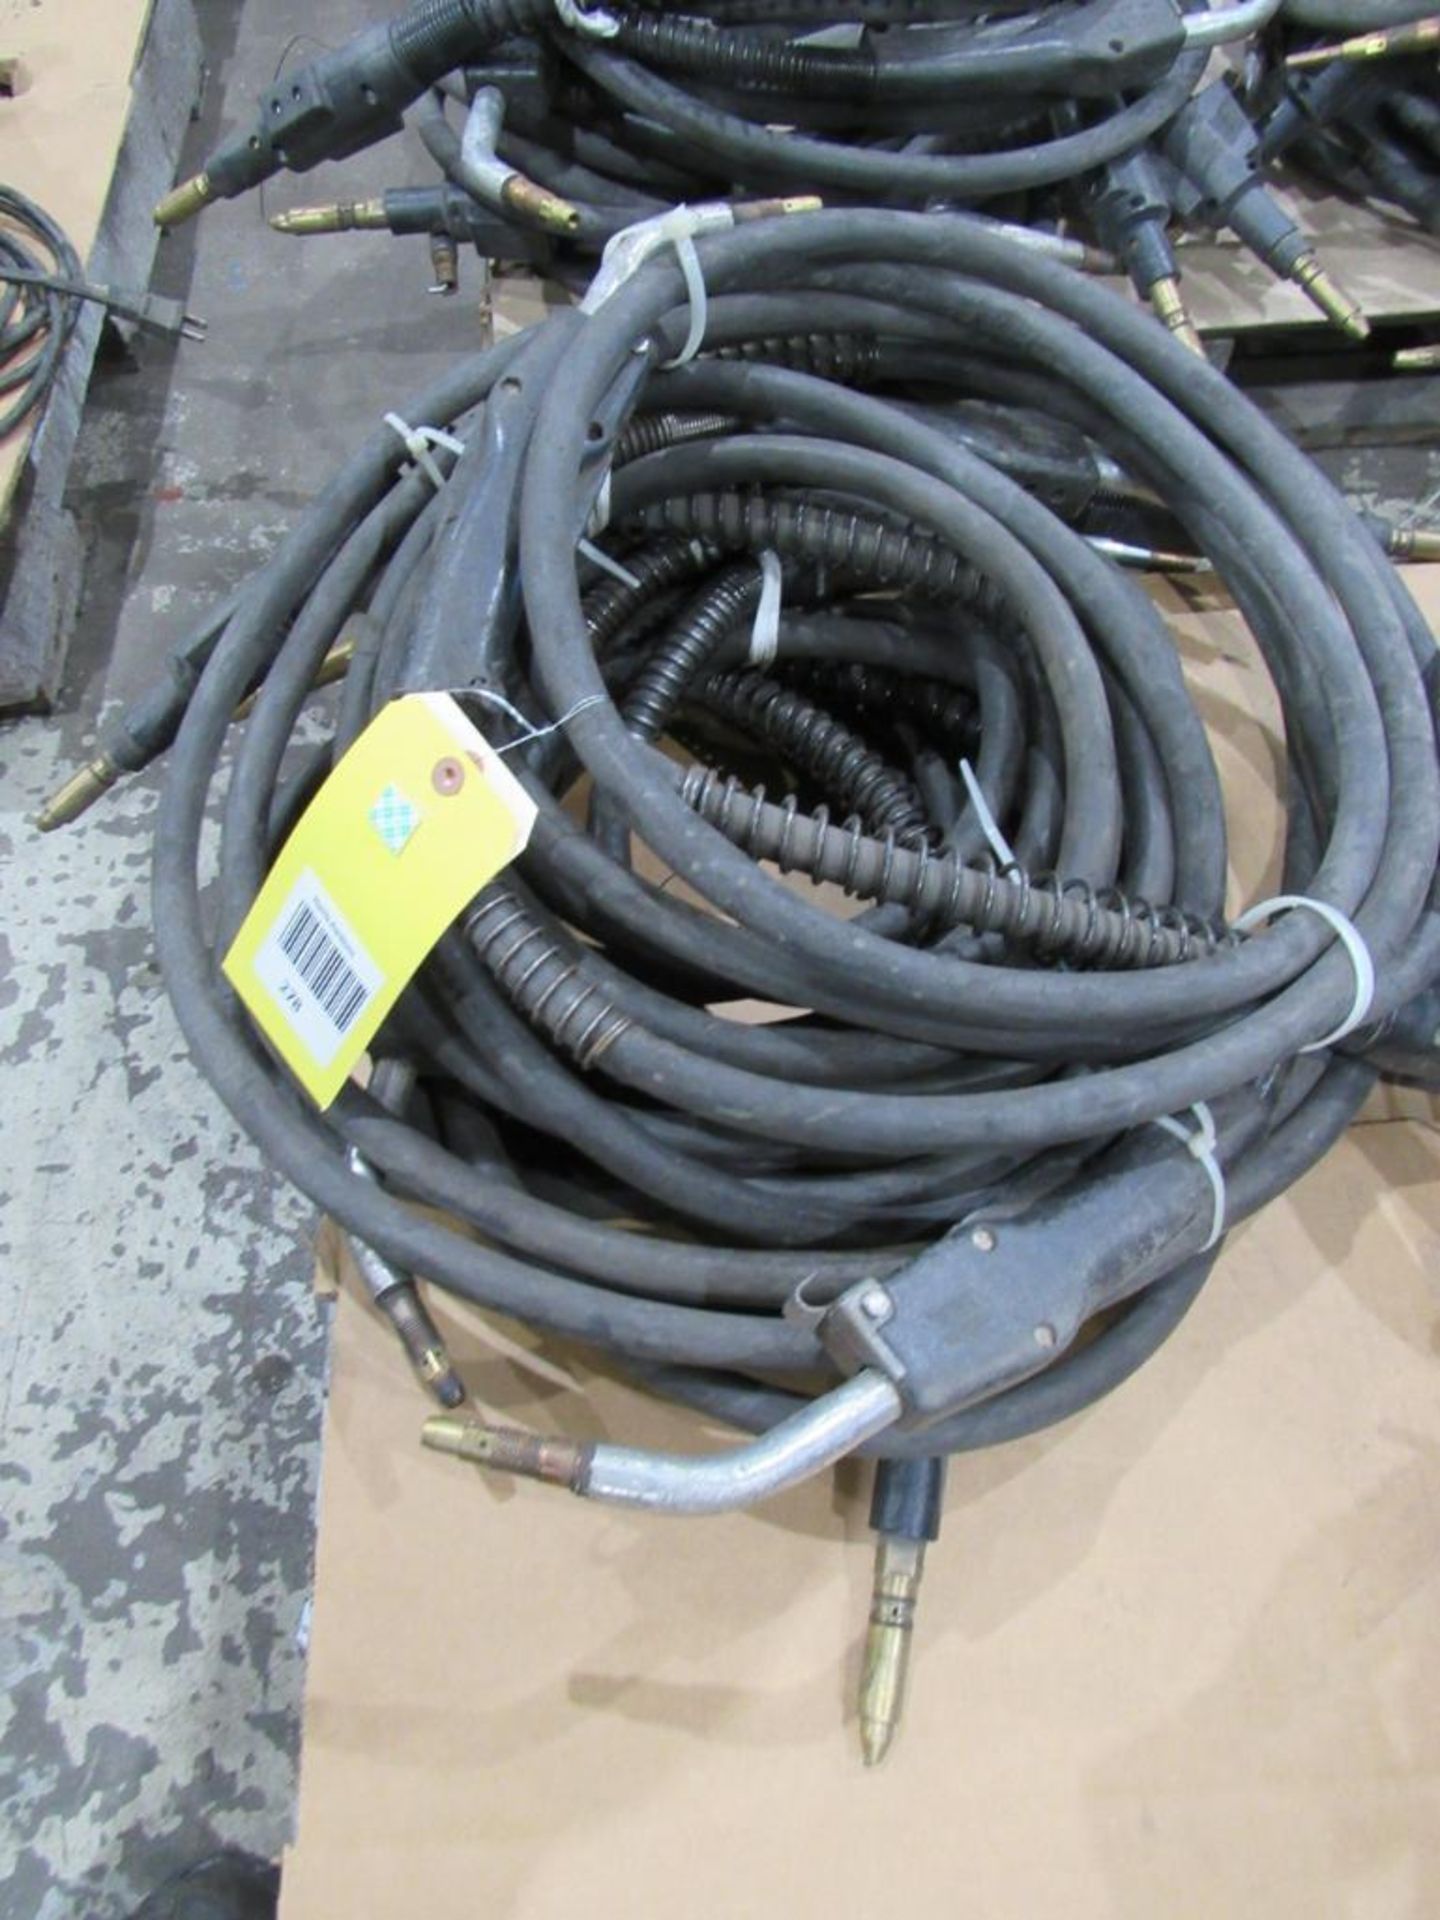 Lot of 6: Welding Cables and Guns - Image 2 of 2